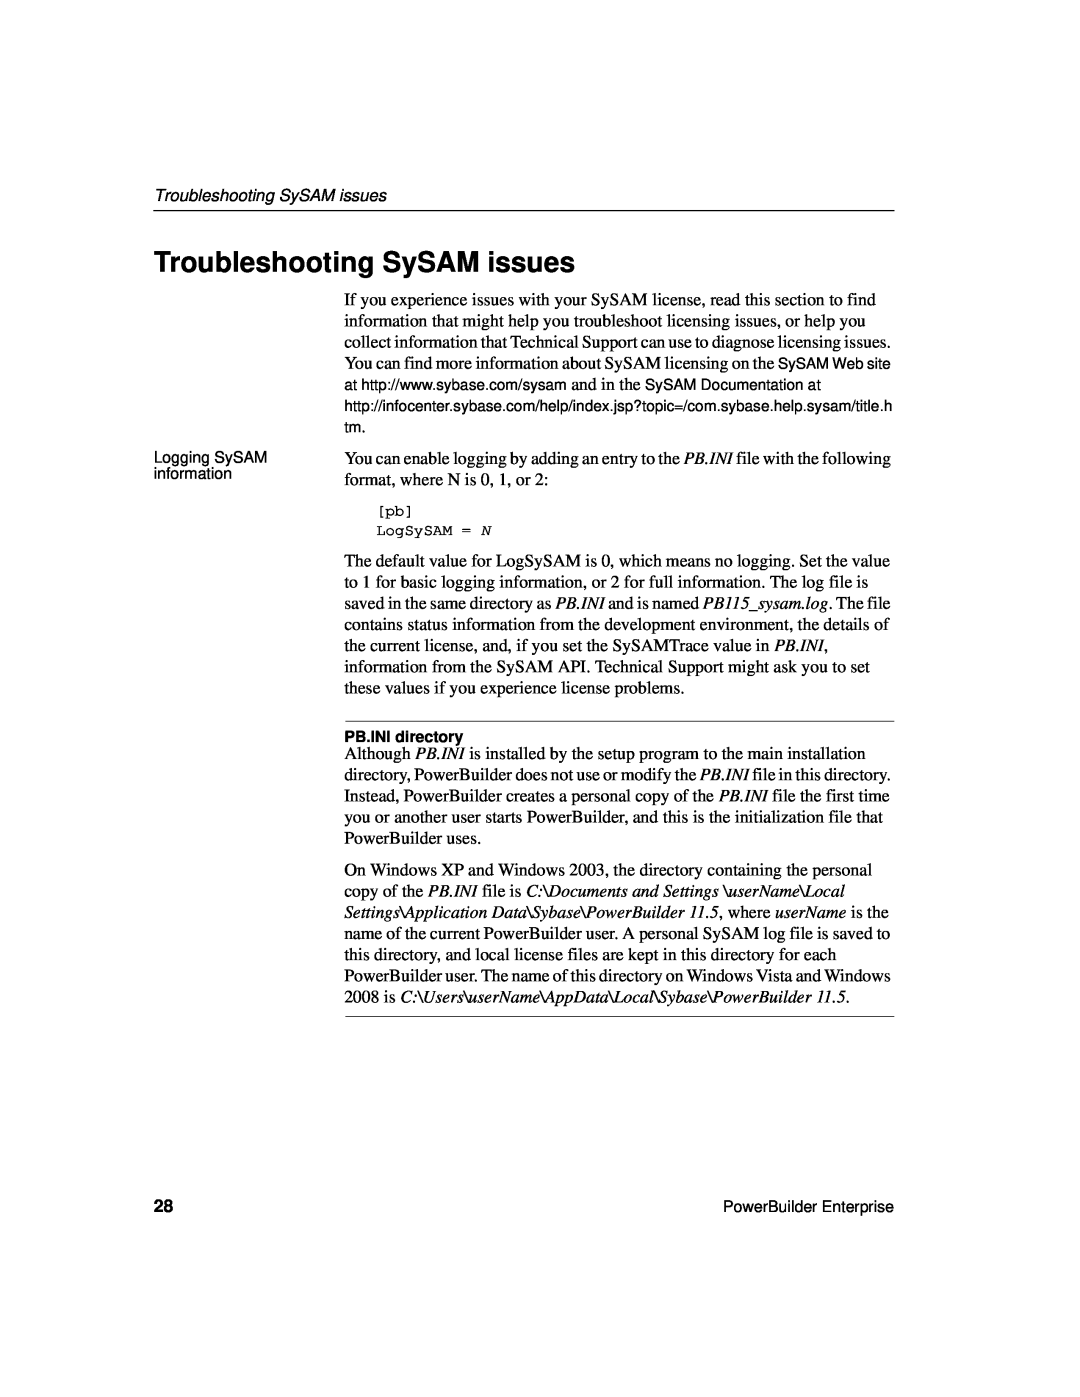 Sybase 6131765115041SS manual Troubleshooting SySAM issues 